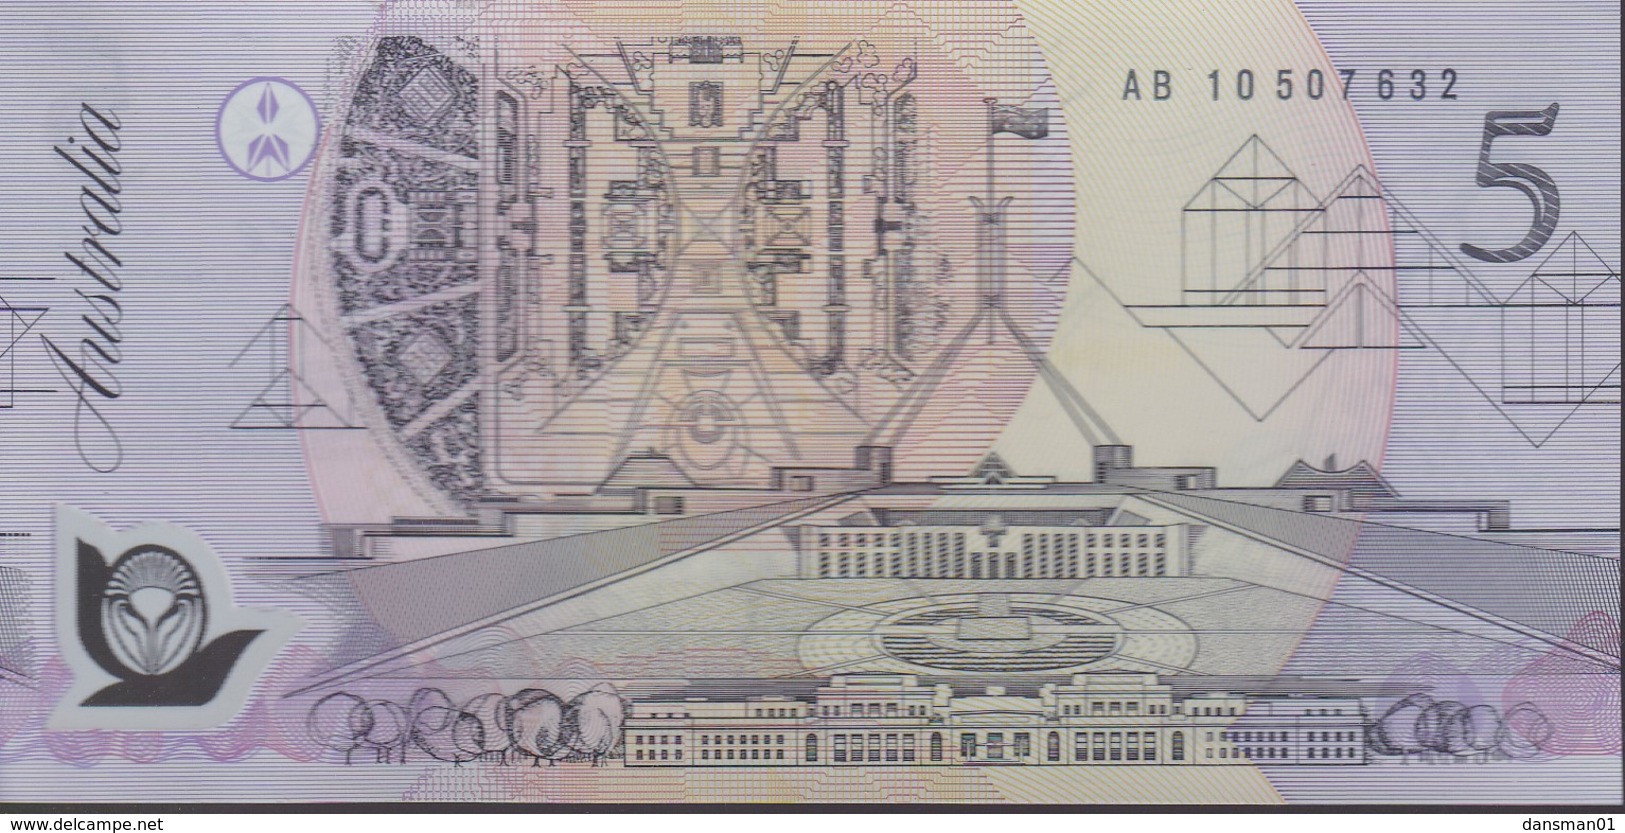 Australia 1992 Polymer $5 AB 10507632 Uncirculated - 1992-2001 (polymer Notes)